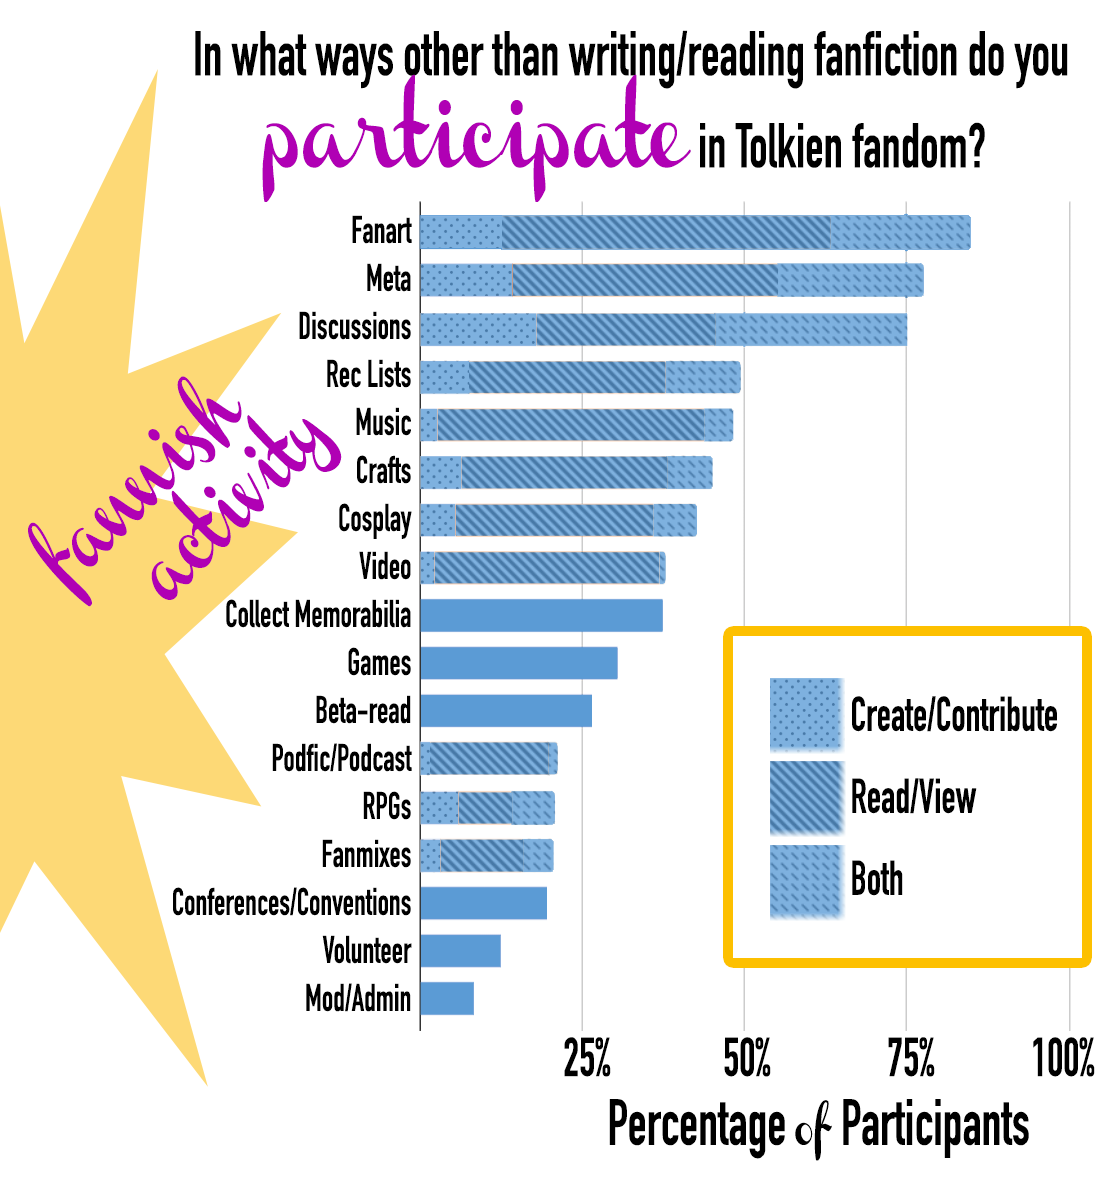 In what ways other than writing/reading fanfiction do you participate in Tolkien fandom? Fanart: 12.5% create/contribute, 50.8% read/view, 21.3% do both. Meta (nonfiction/essays/commentary on original text): 14.2% create/contribute, 41.0% read/view, 22.4% do both. Online discussions: 18.0% create/contribute, 27.5% read/view, 29.4% do both. Music: 2.7% create/contribute, 41.2% read/view, 4.3% do both. Crafts: 6.3% create/contribute, 31.8% read/view, 6.8% do both. Recommendation lists: (“recs”) 7.5% create/contribute, 30.2% read/view, 11.7% do both. Collect Tolkien-related memorabilia or artifacts other than books: 37.3%. Video: 2.3% create/contribute, 34.5% read/view, 0.9% do both. Cosplay: 5.5% create/contribute, 30.4% read/view, 6.8% do both. Play Tolkien-related games: 30.4%. Beta-read: 26.4% create/contribute, 18.1% read/view, 1.5% do both. Podfic/podcast: 1.6% create/contribute, 18.1% read/view, 1.5% do both. Fanmixes: 3.1% create/contribute, 12.7% read/view, 4.7% do both. Attend conferences, conventions, and other offline fan gatherings: 19.6%. RPGs: 5.9% create/contribute, 8.2% read/view, 6.6% do both. Volunteer for fandom sites, events, and projects, not in an admin/moderator role: 12.3%. Coordinate or moderate fandom sites, events, and projects: 8.3%